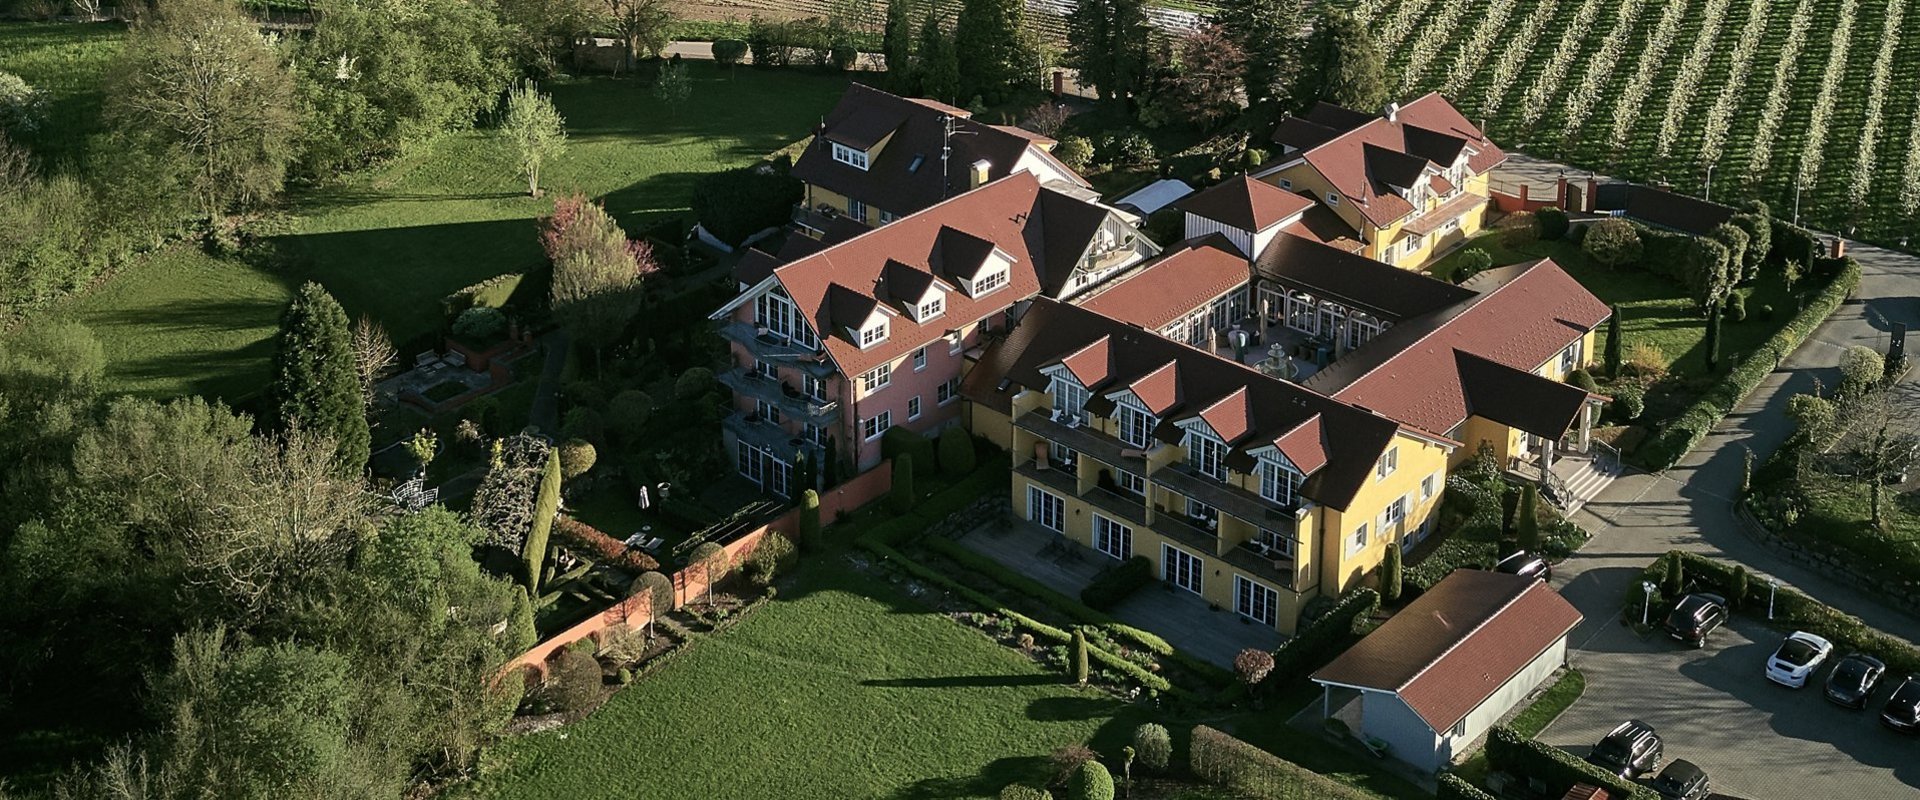 Aerial view of the roofs of the Hotel Villino in Lindau on Lake Constance, insulated with puren